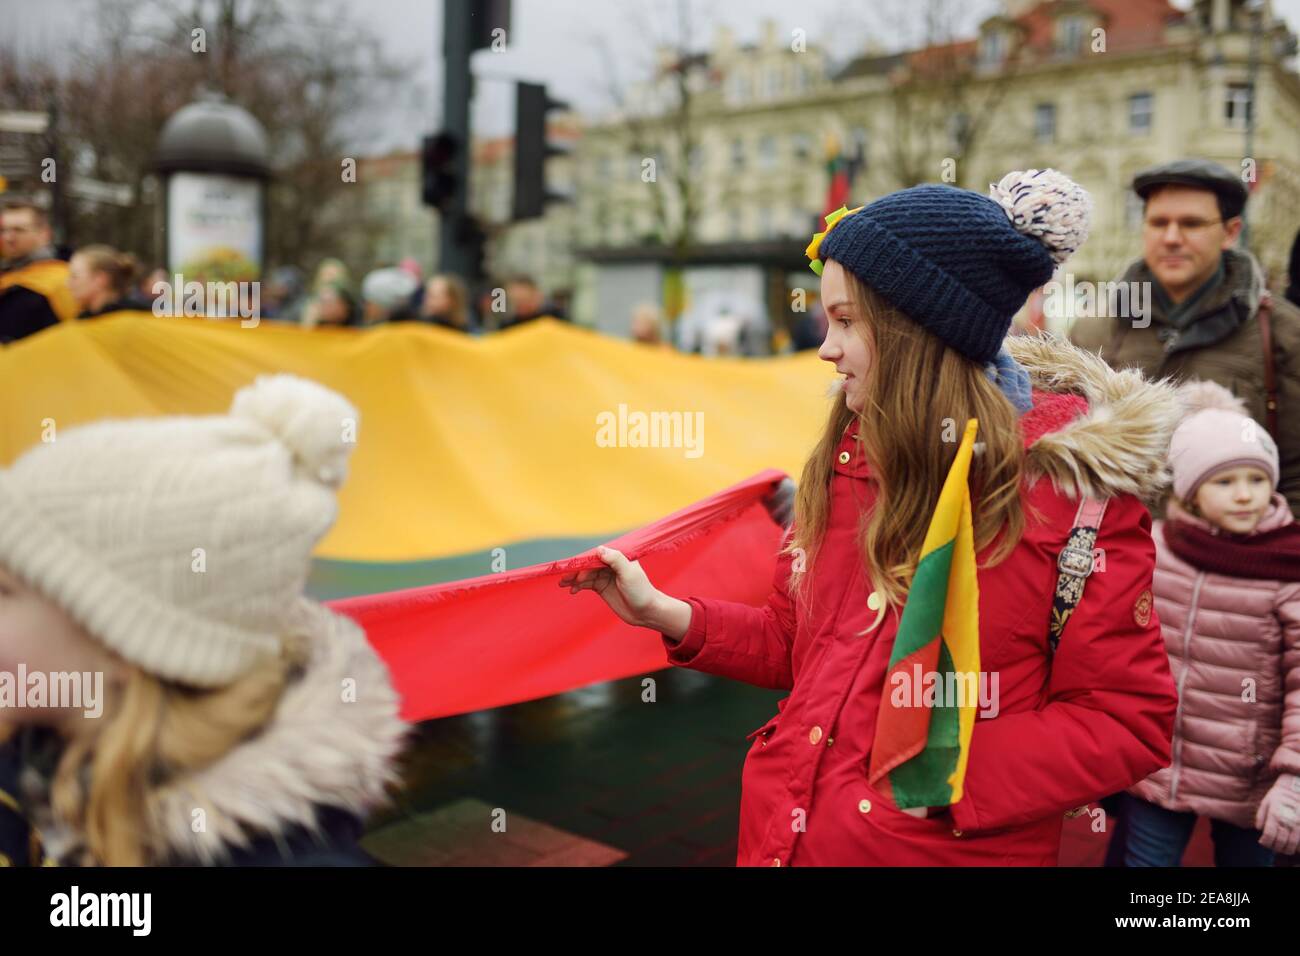 VILNIUS, LITHUANIA - MARCH 11, 2020: Thousands of people taking part in a festive events as Lithuania marked the 30th anniversary of its independence Stock Photo